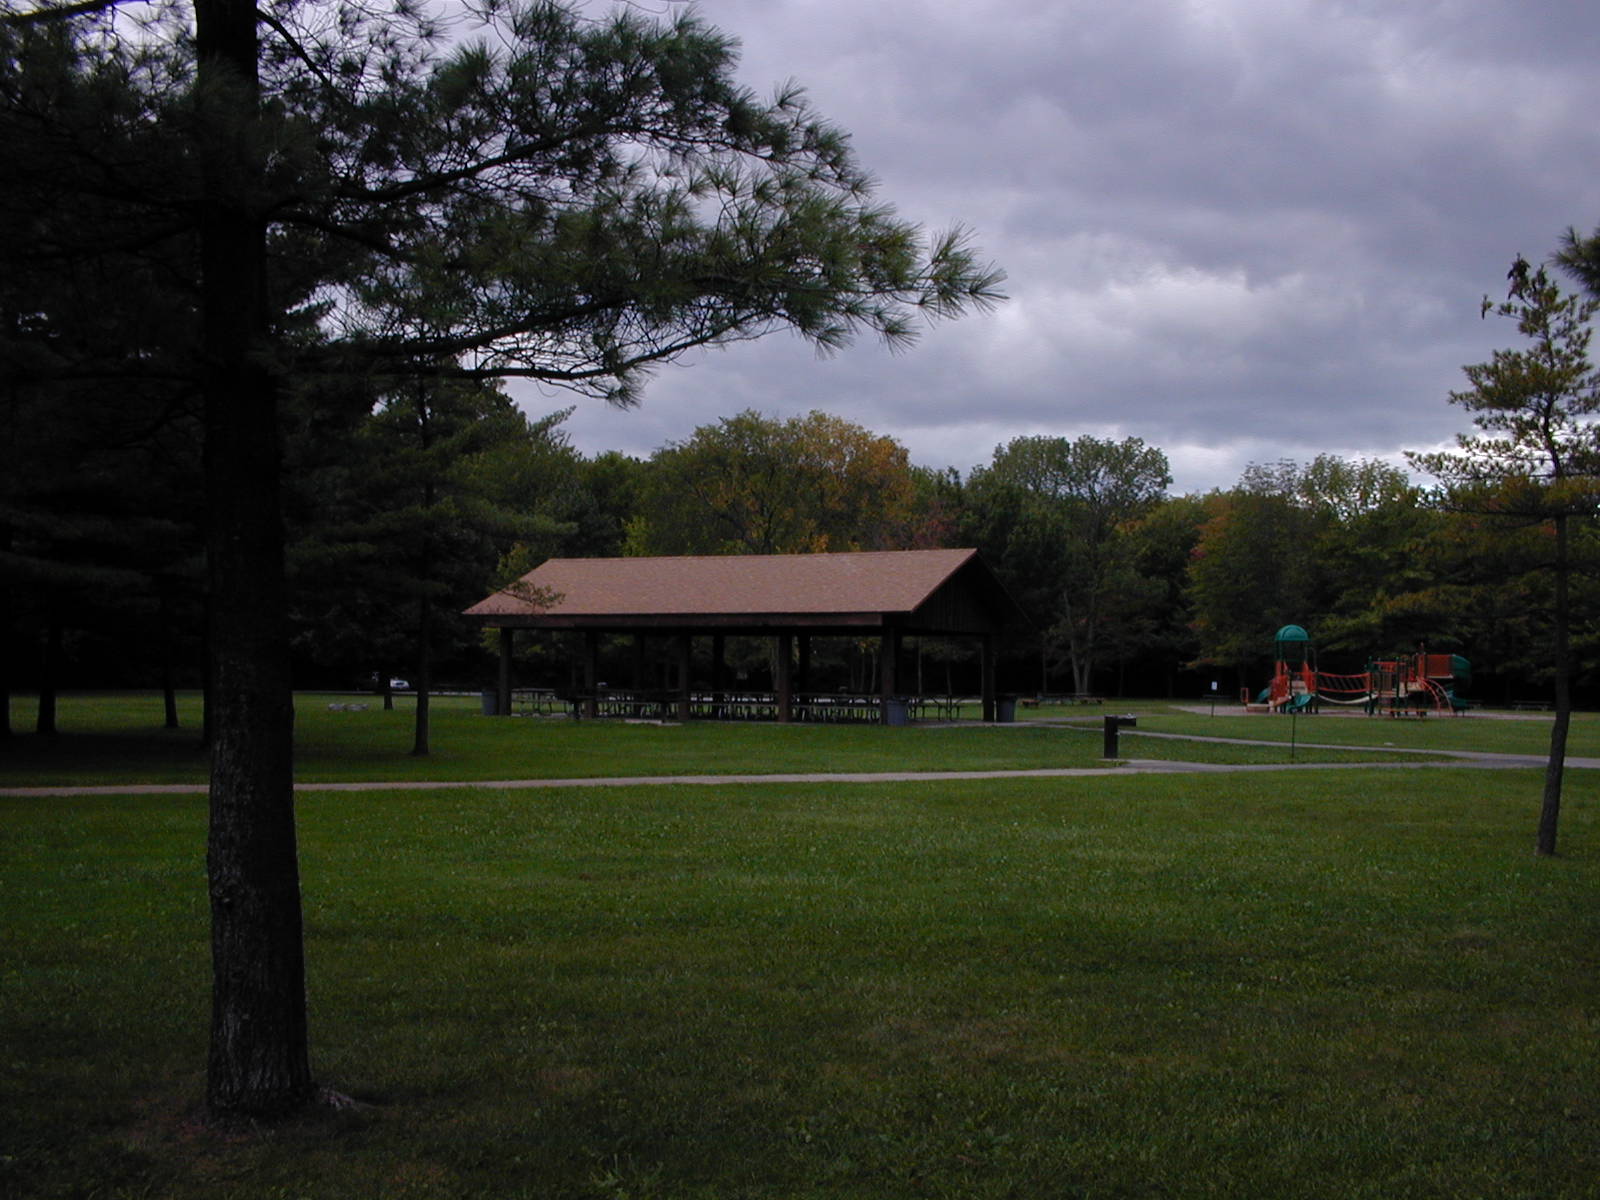 Pine Tree Picnic Area shelter and playground